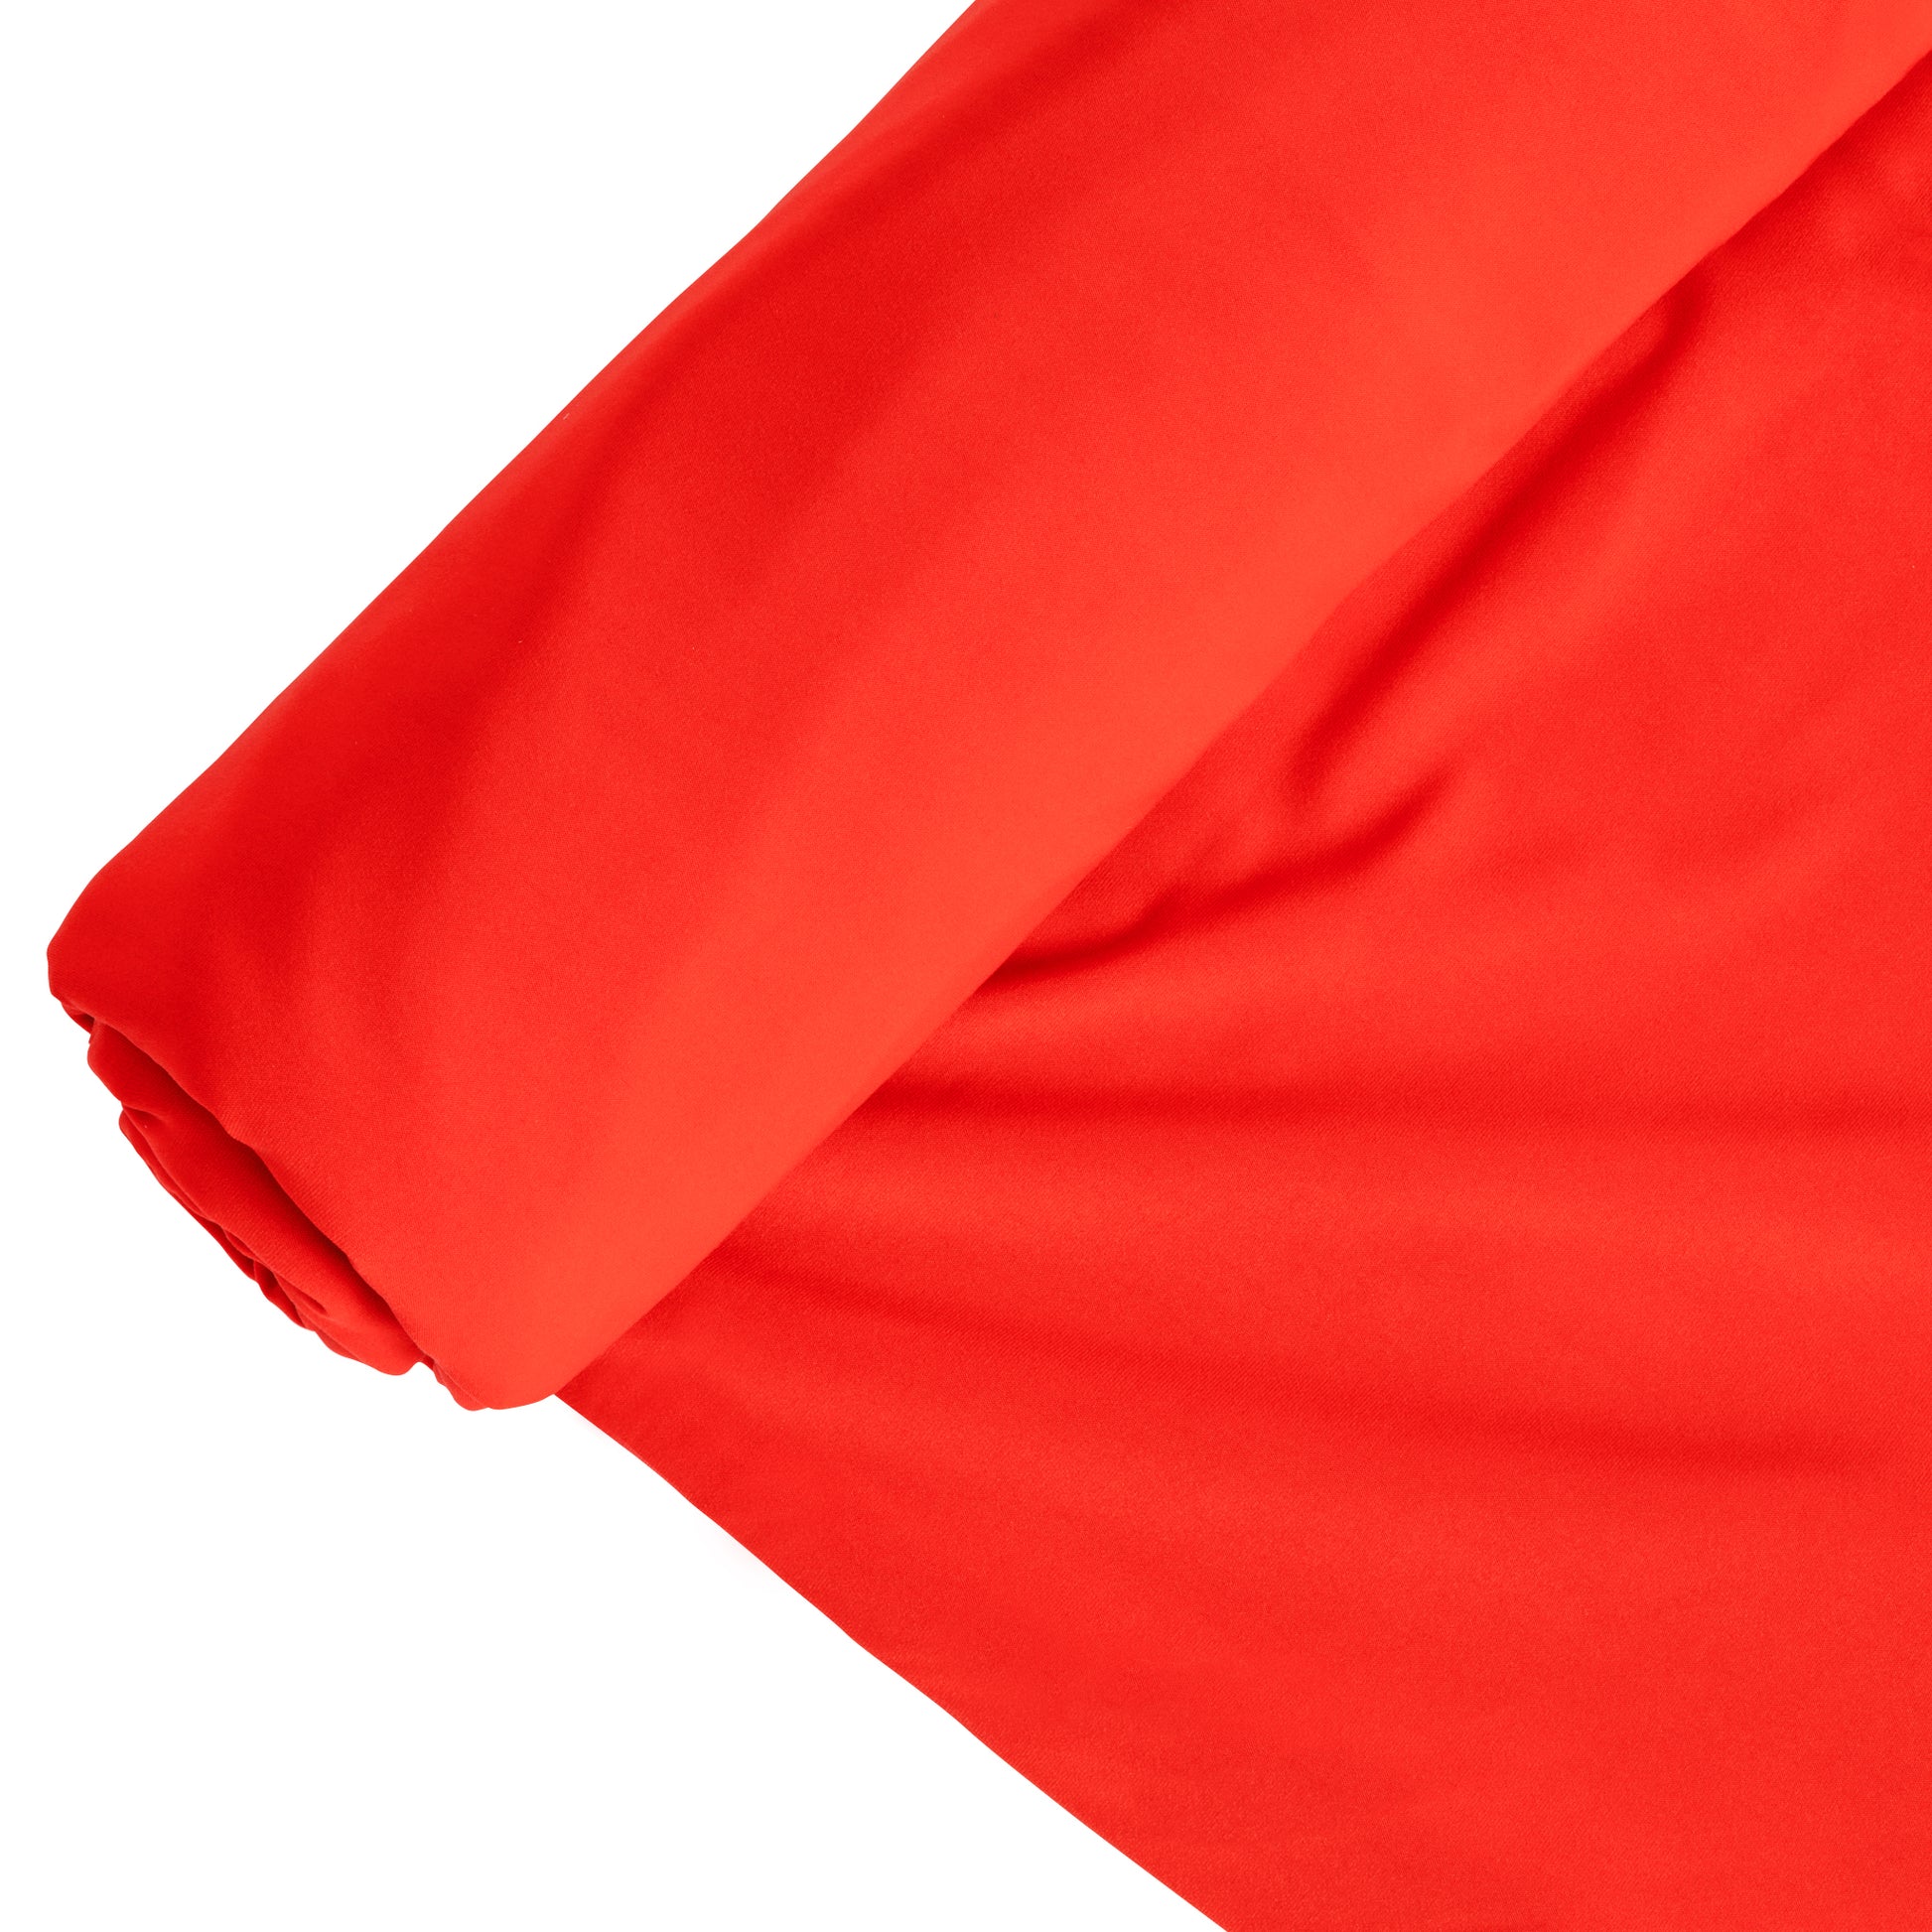 Wholesale 4 way stretch microfiber fabric For A Wide Variety Of